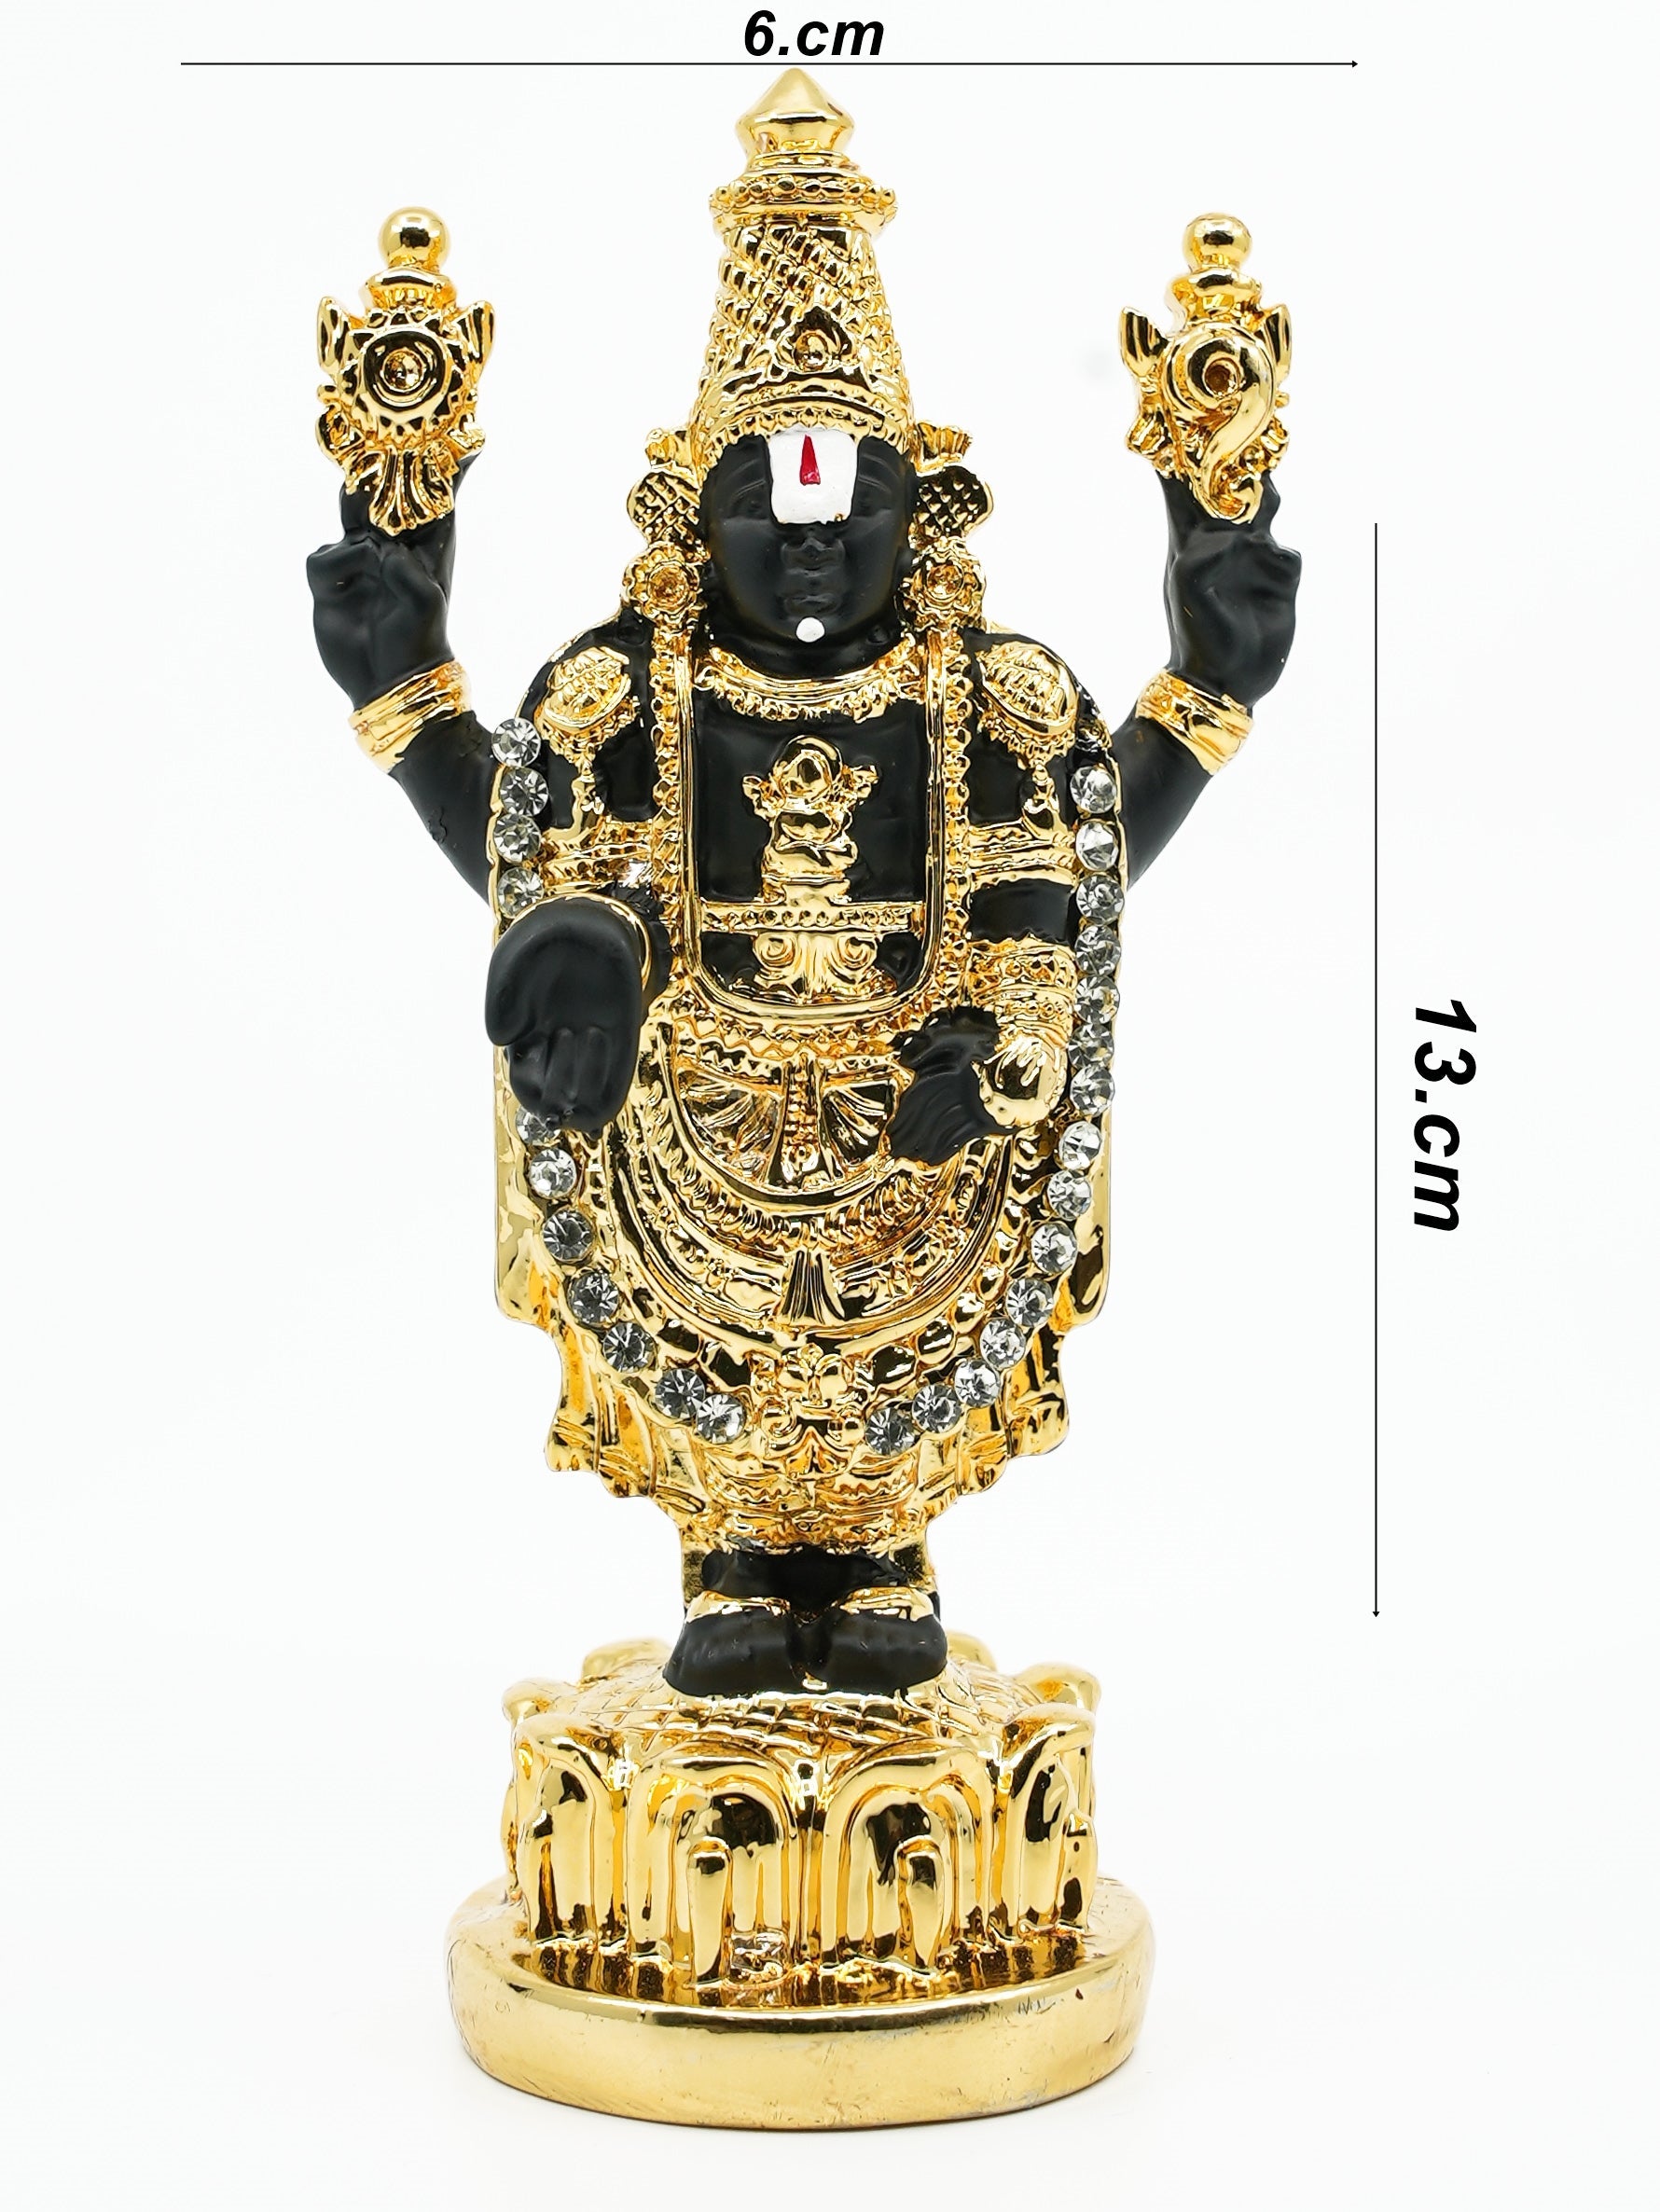 Balaji Gold Plated Marble idol Height 13cm with stones